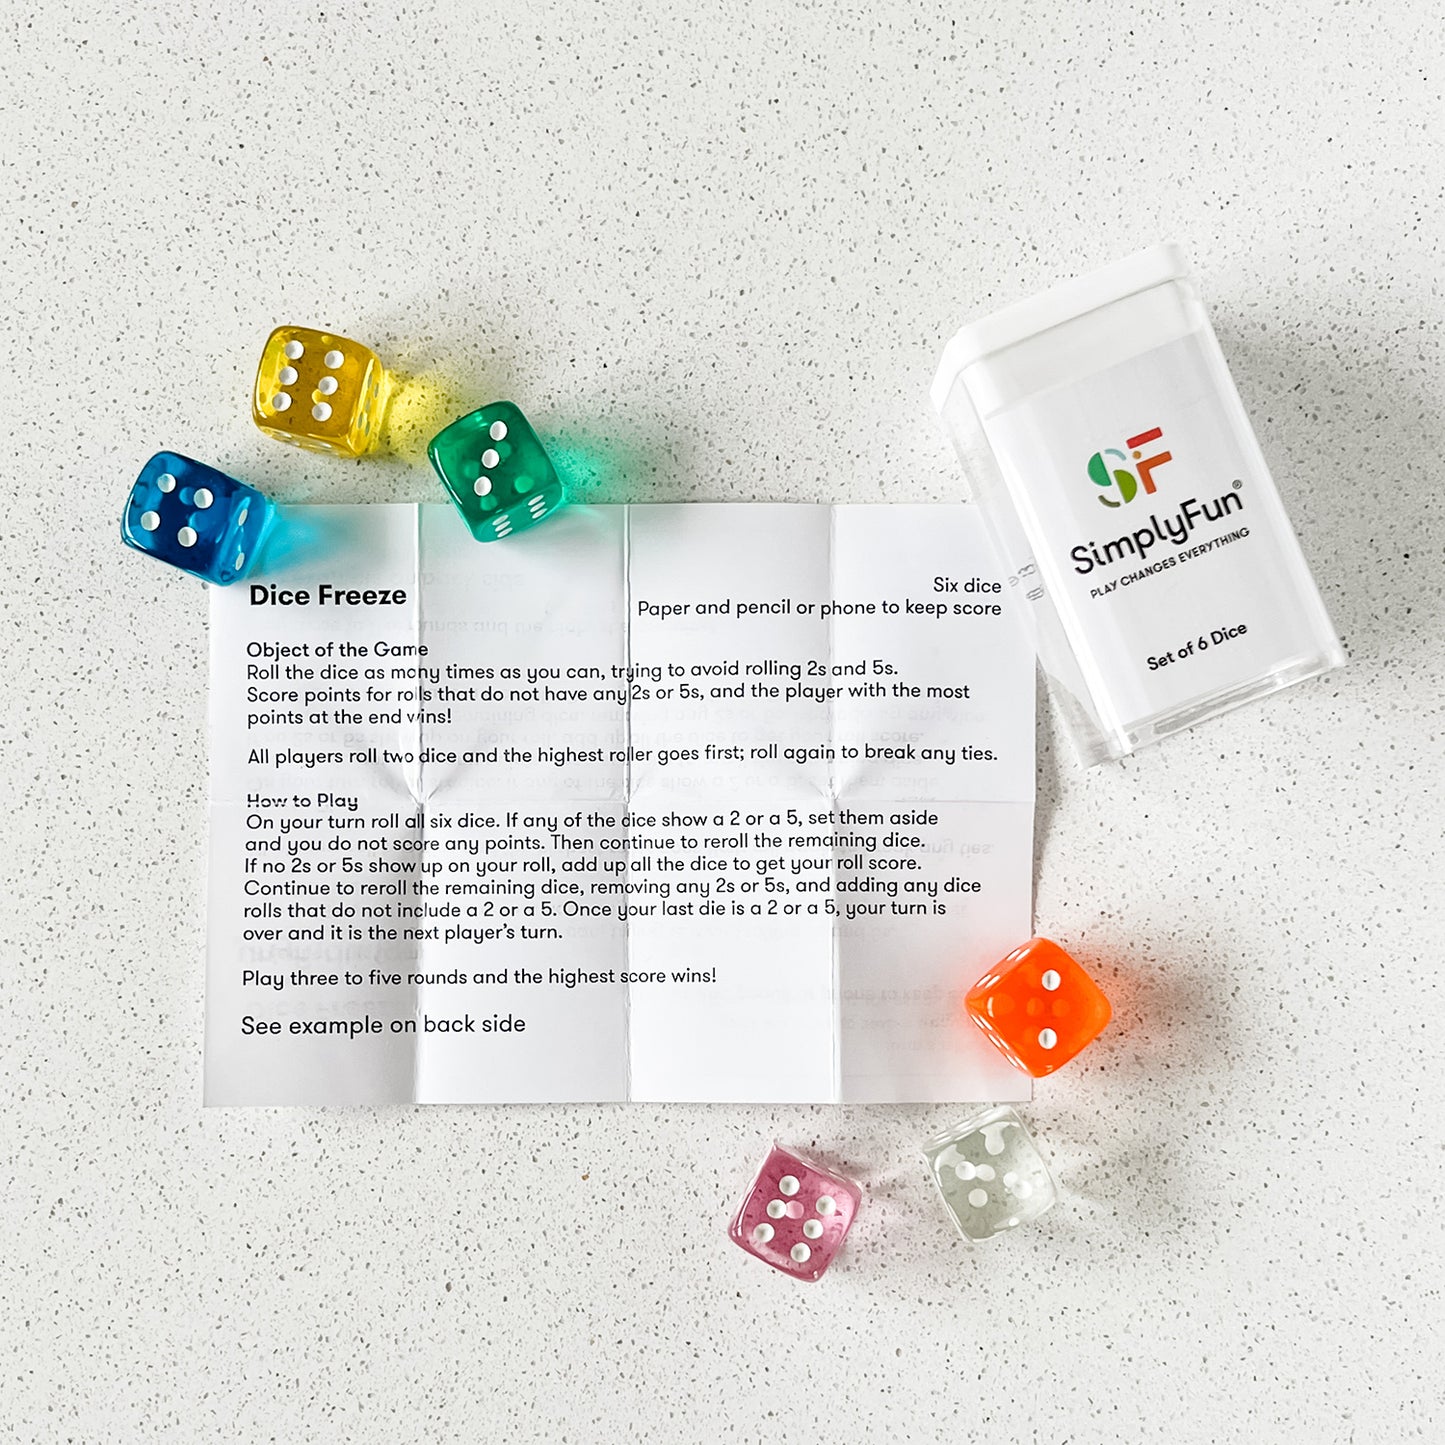 Six colorful dice in a travel box, with a dice game, by SimplyFun.